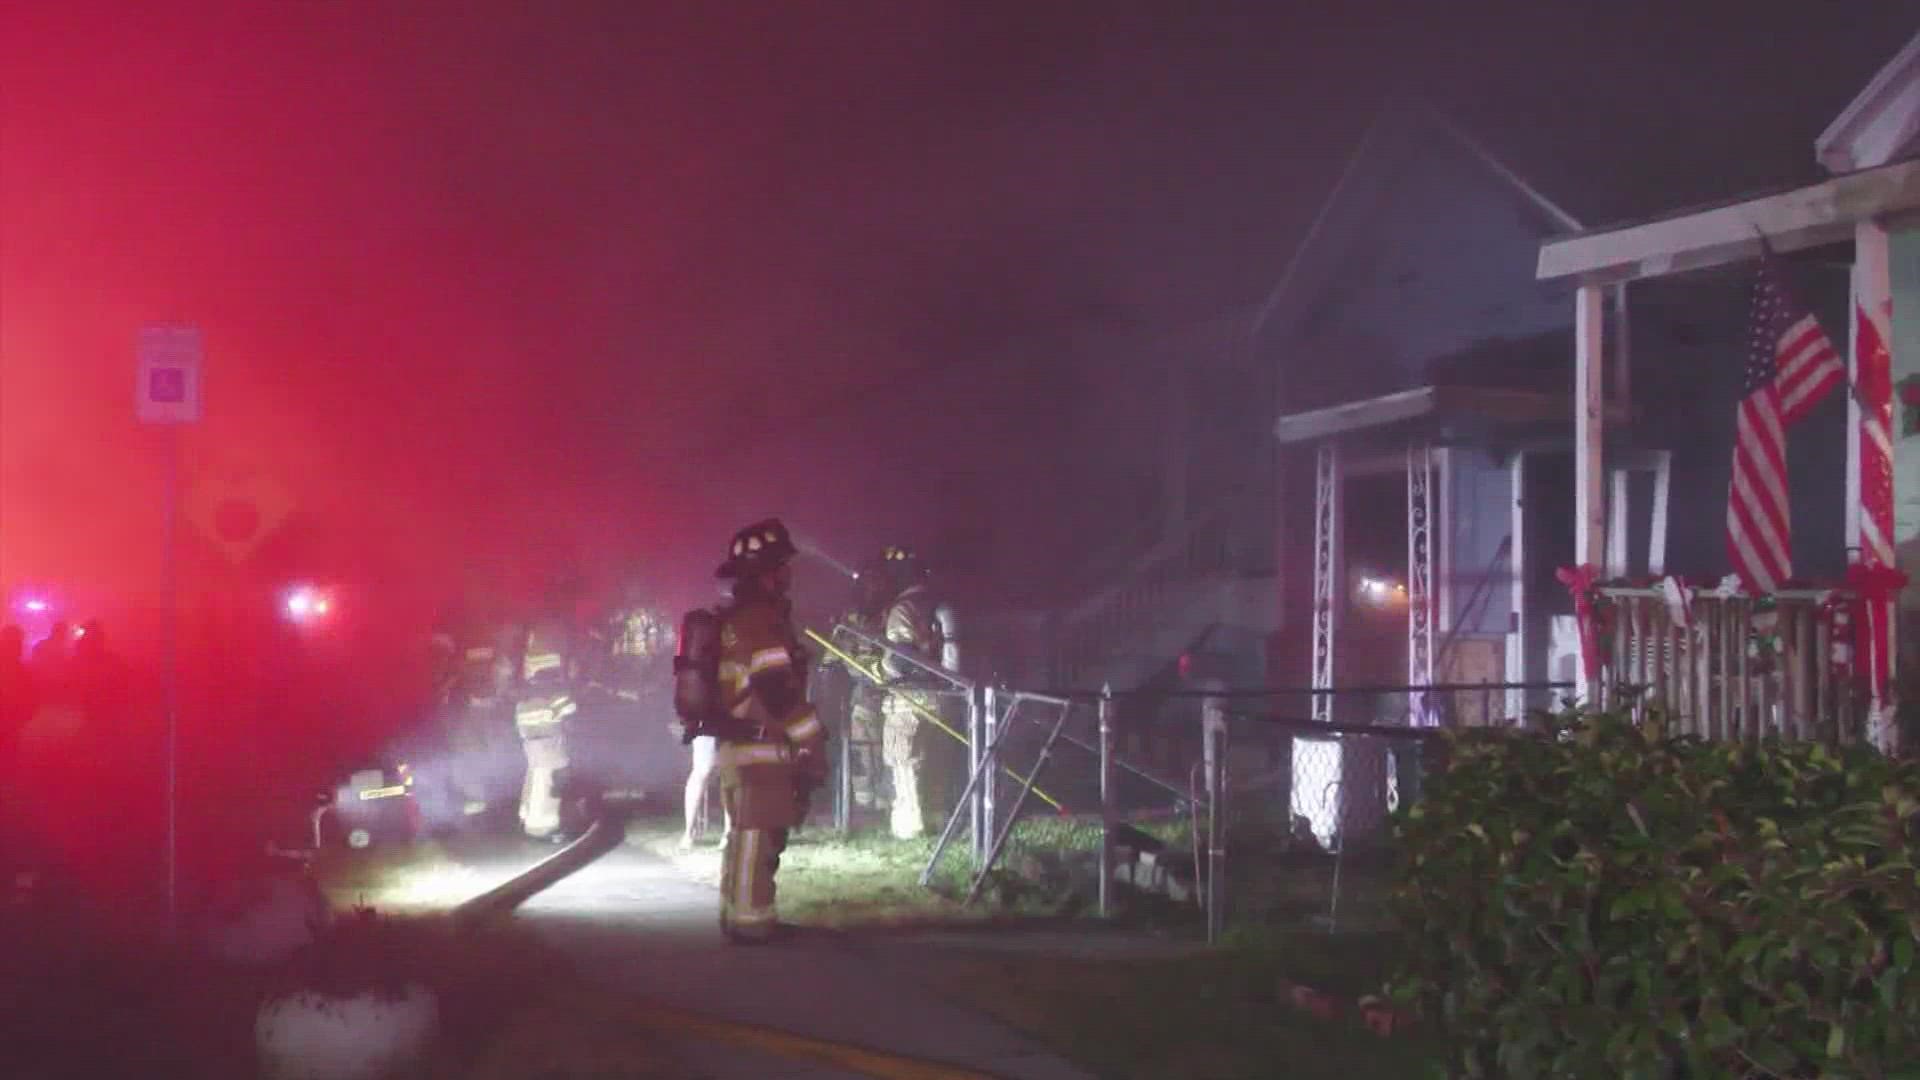 A woman was found dead after a house fire in Galveston Sunday night, according to the Galveston Fire Department.